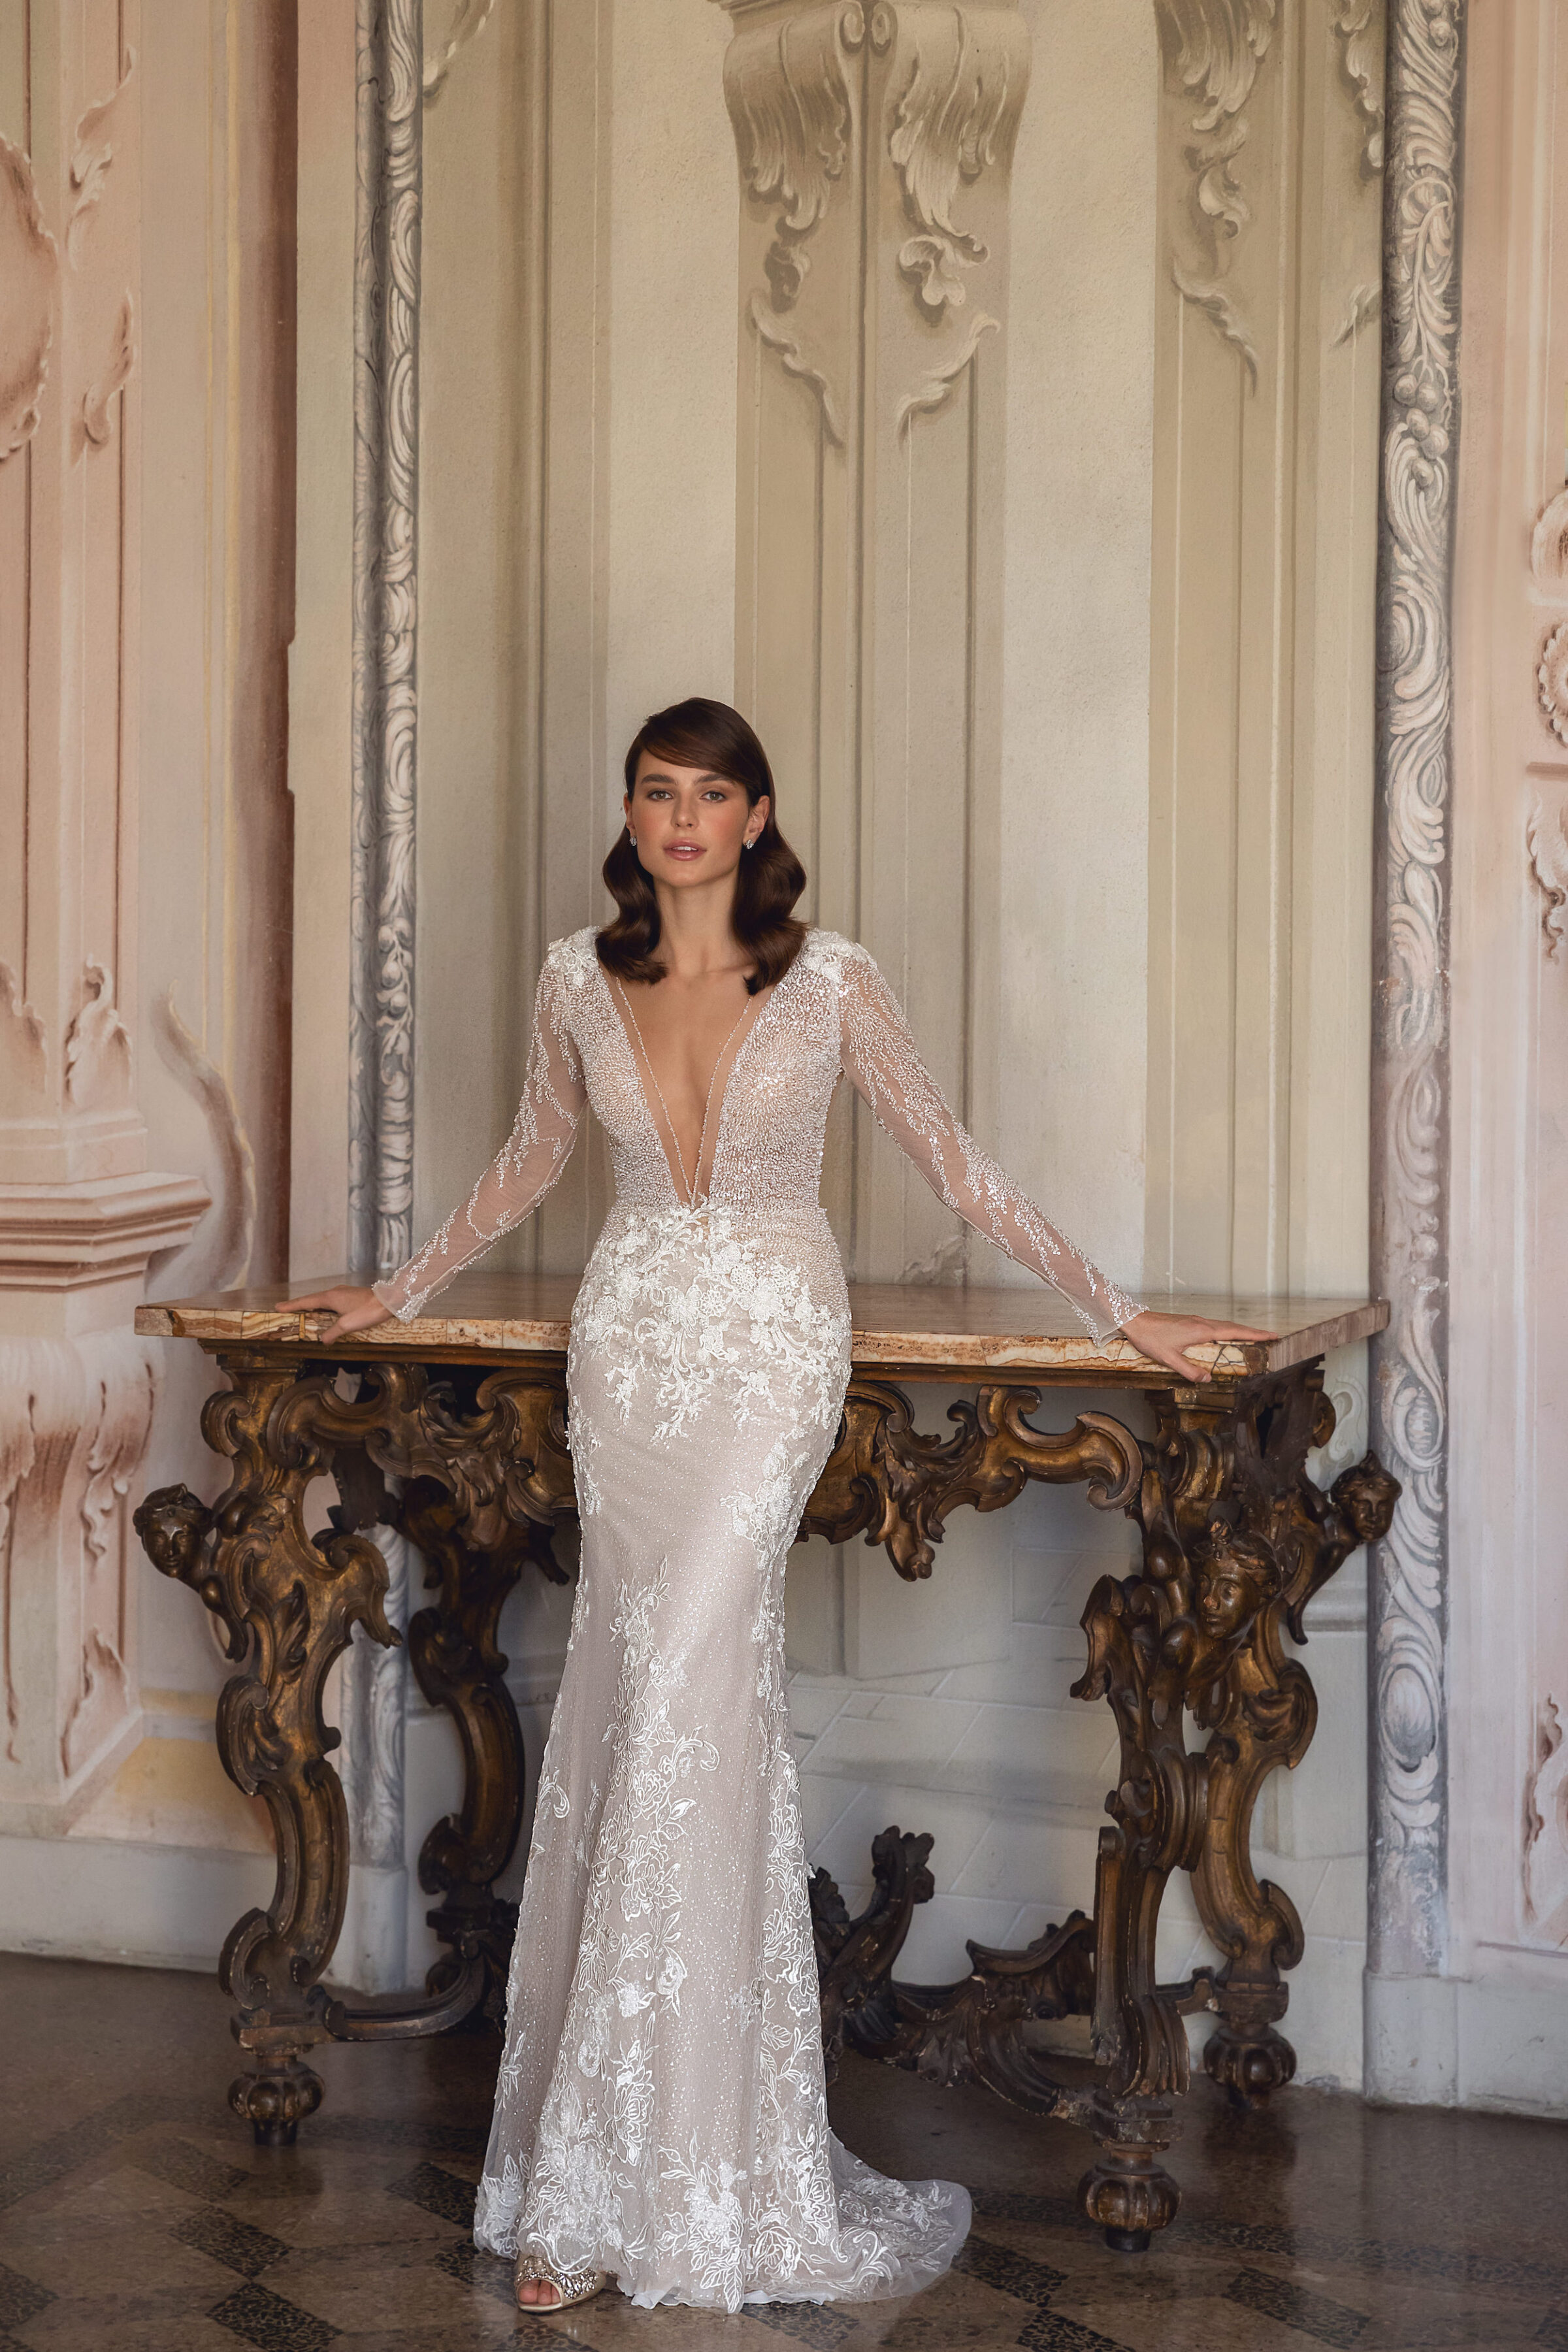 Lace mermaid wedding dress with ong sleeves - Domenica